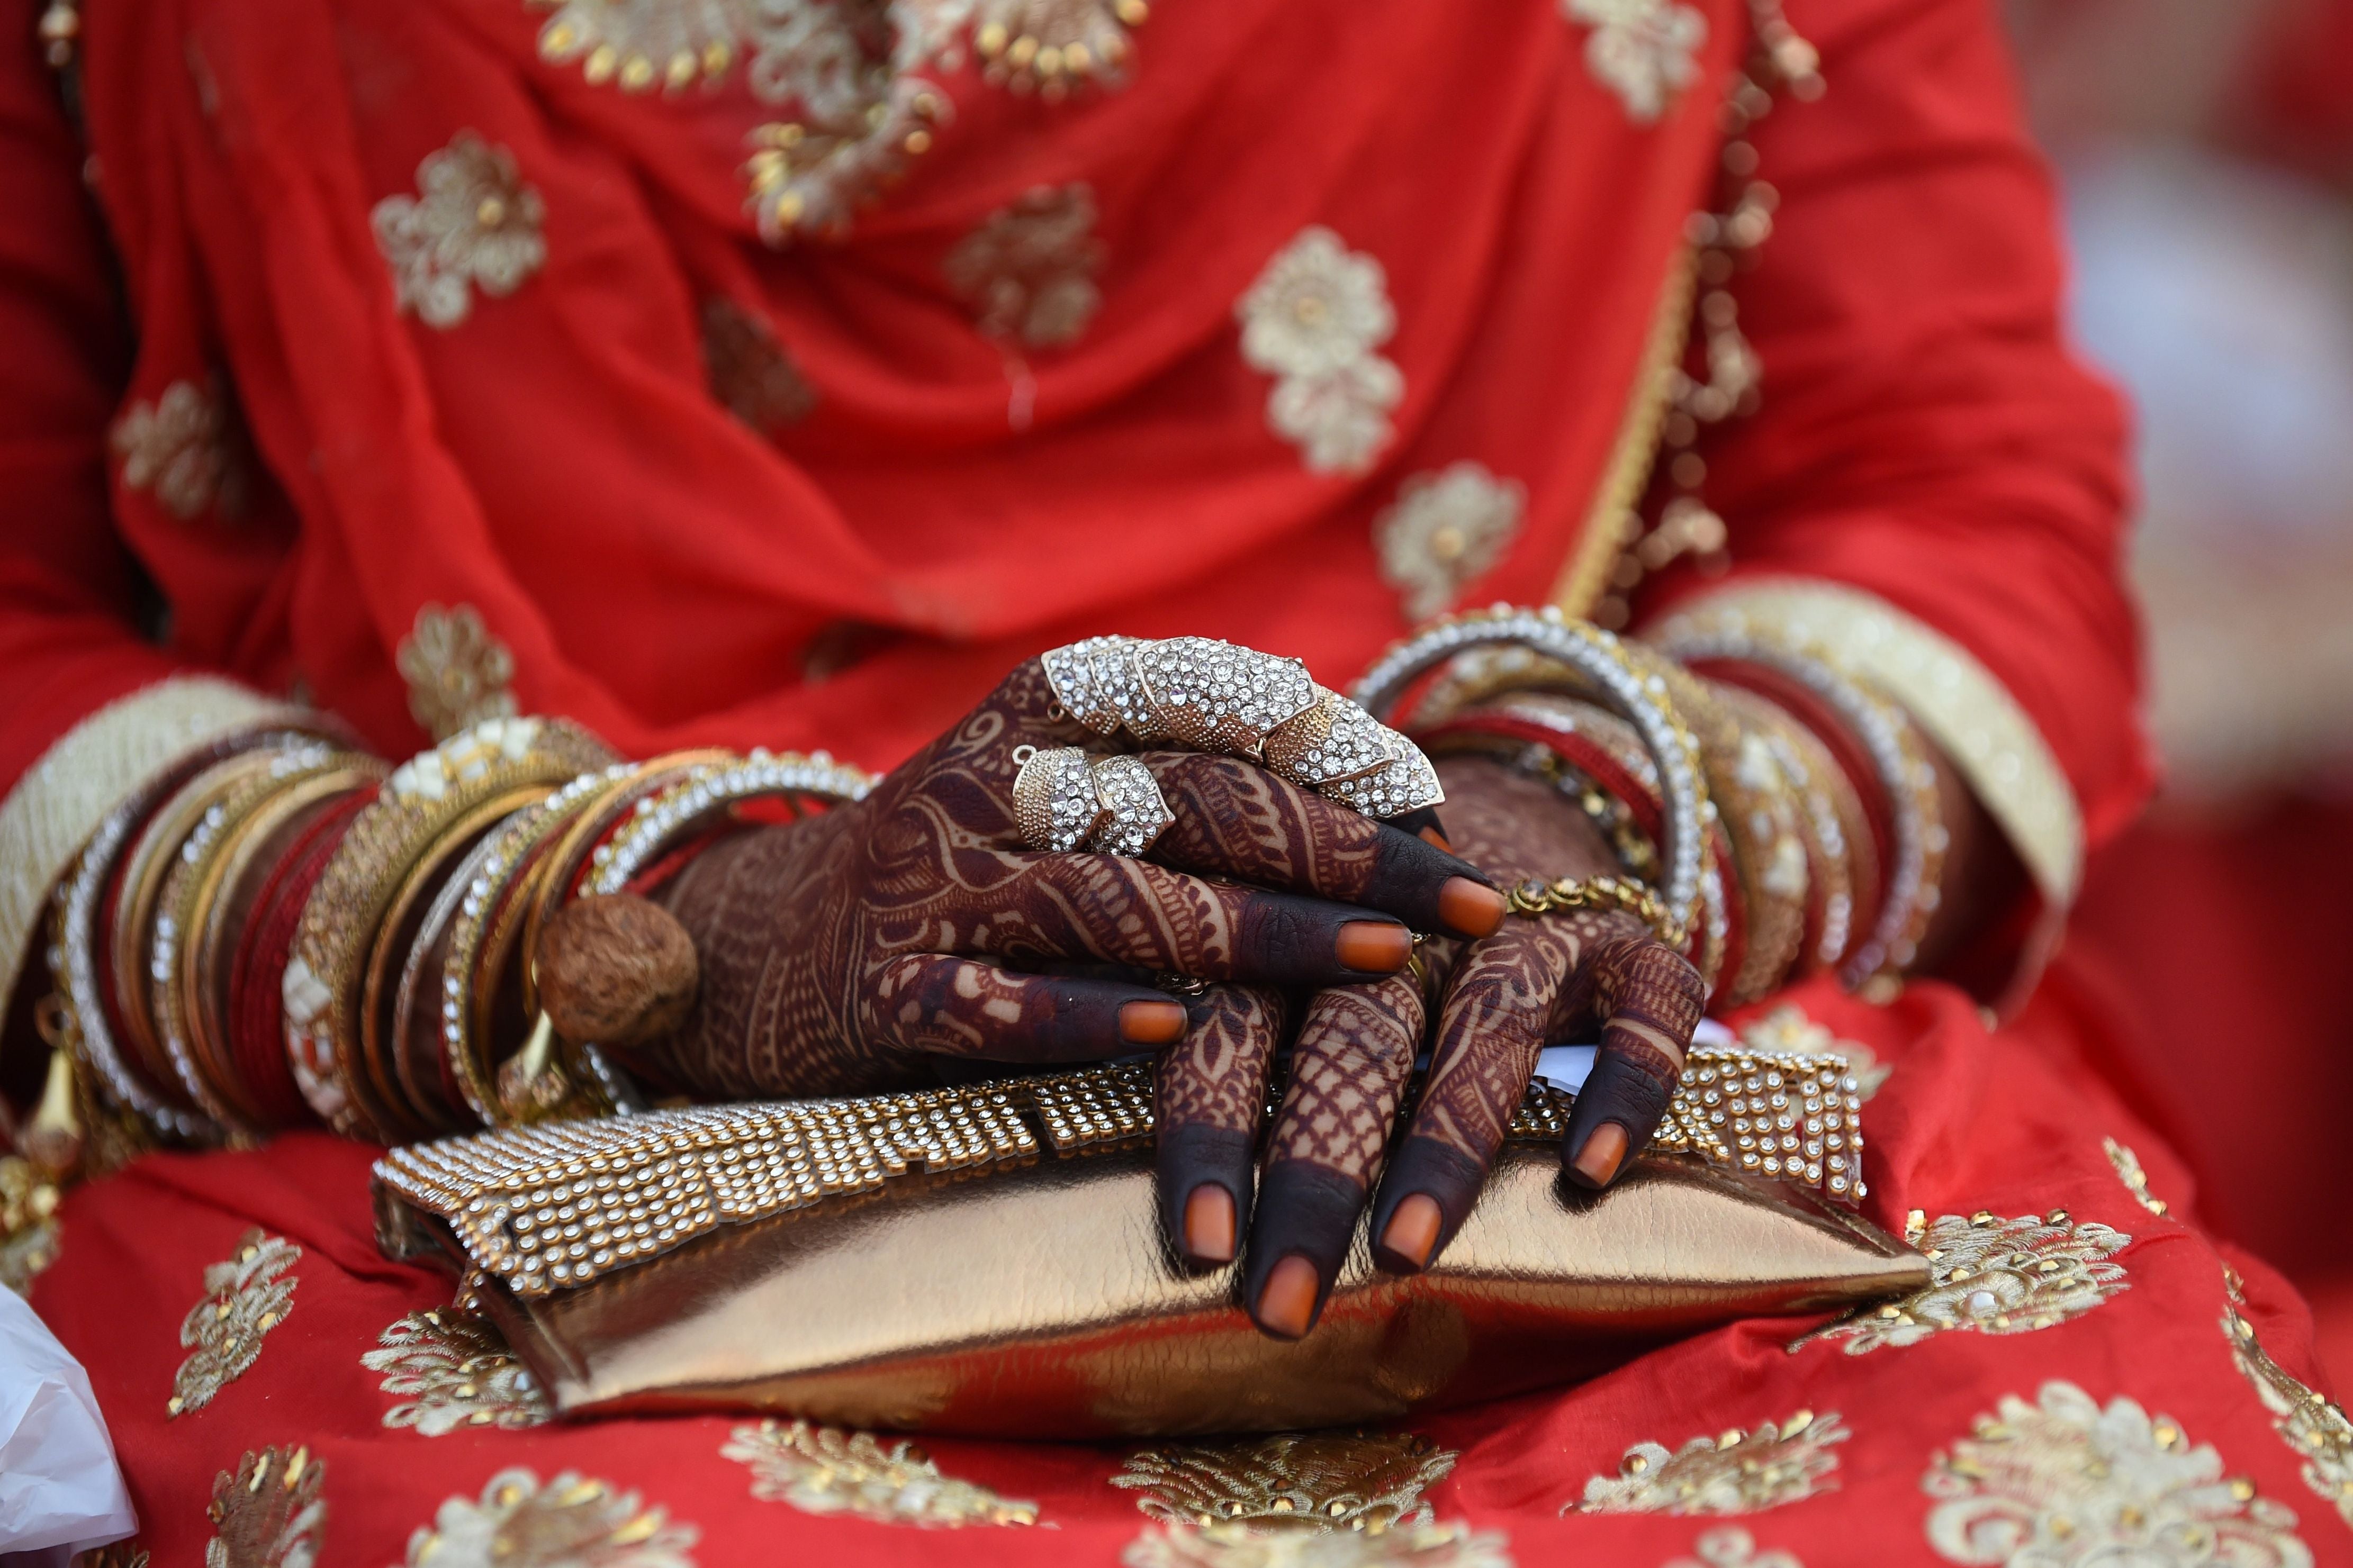 <p>Representative: An Indian bride’s hands decorated with henna</p>